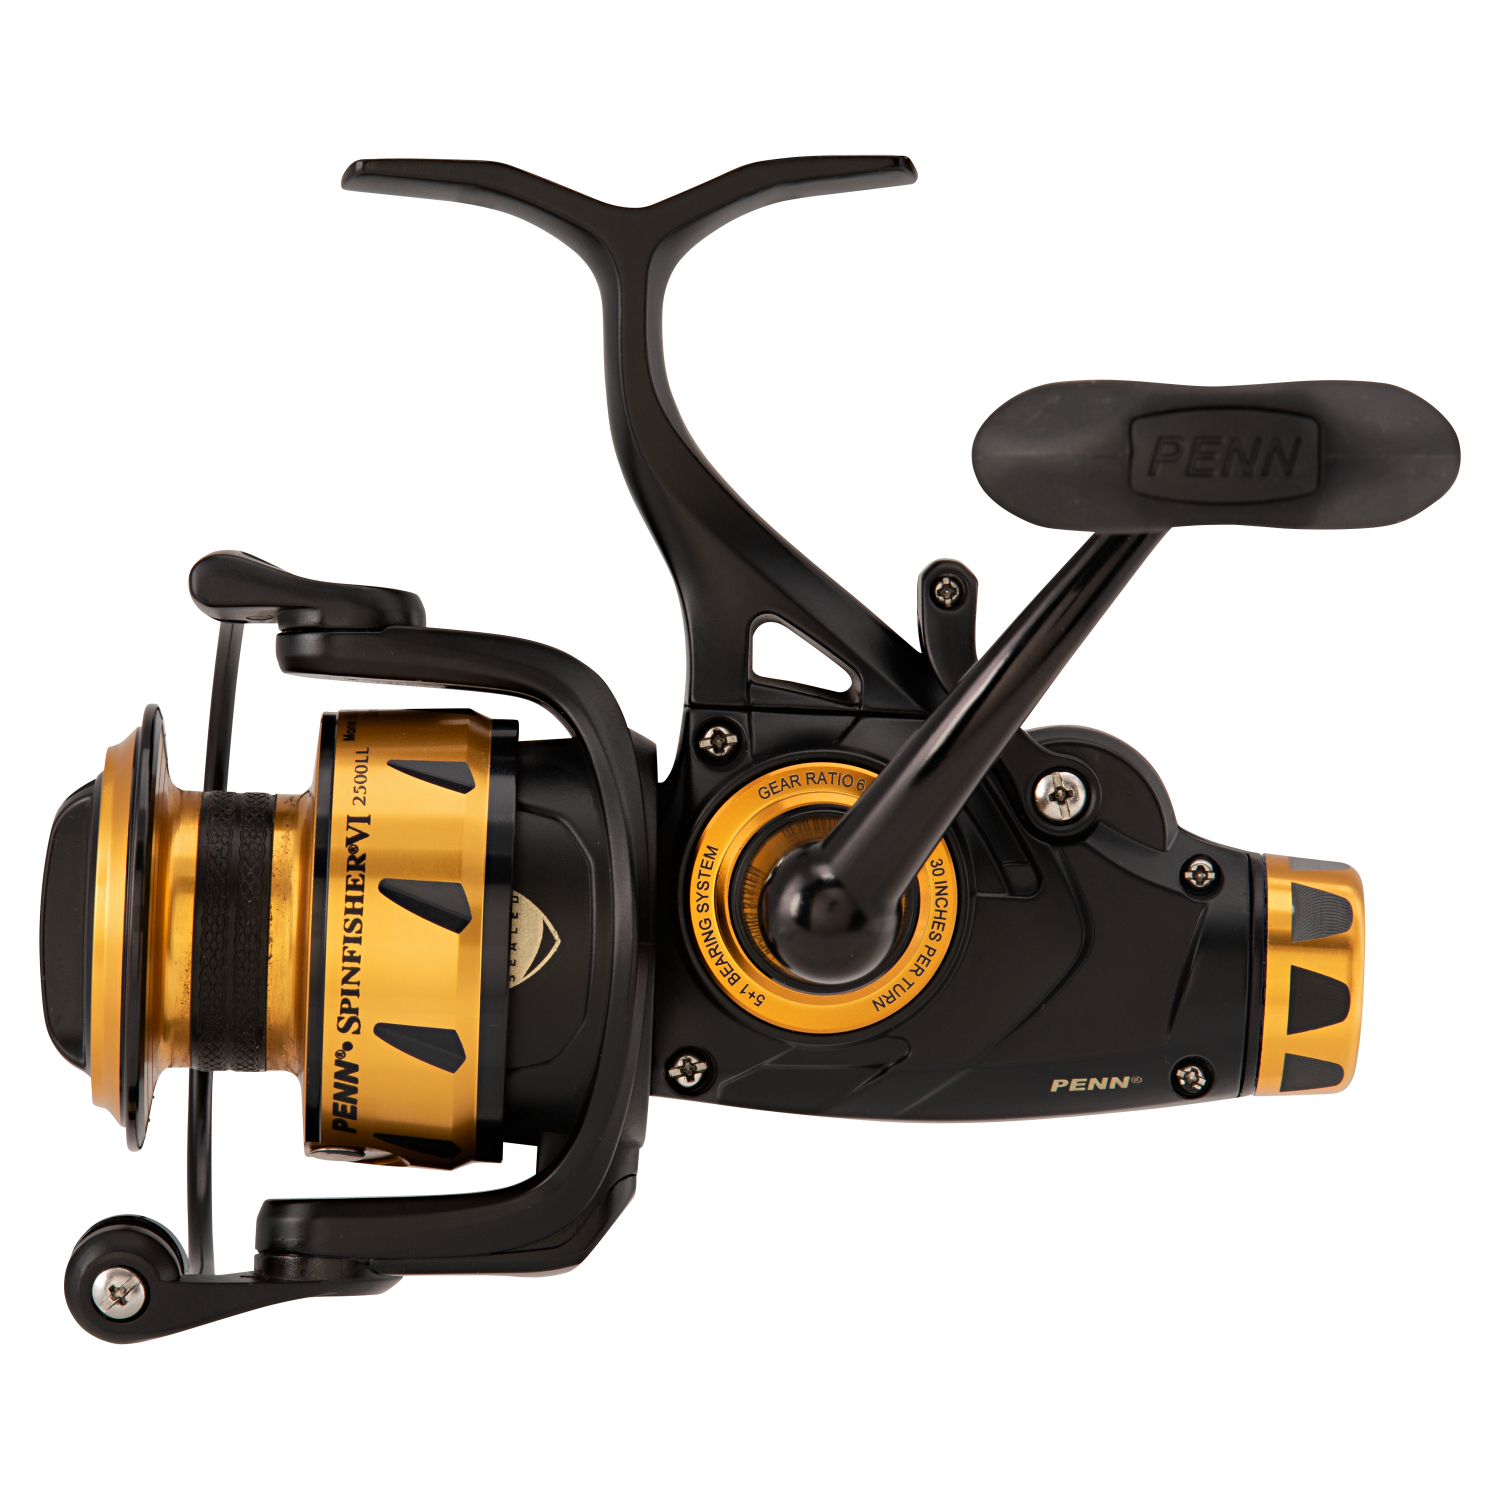 Penn Sea Fishing Reel Spinfisher VI Live Liner Spinning at low prices